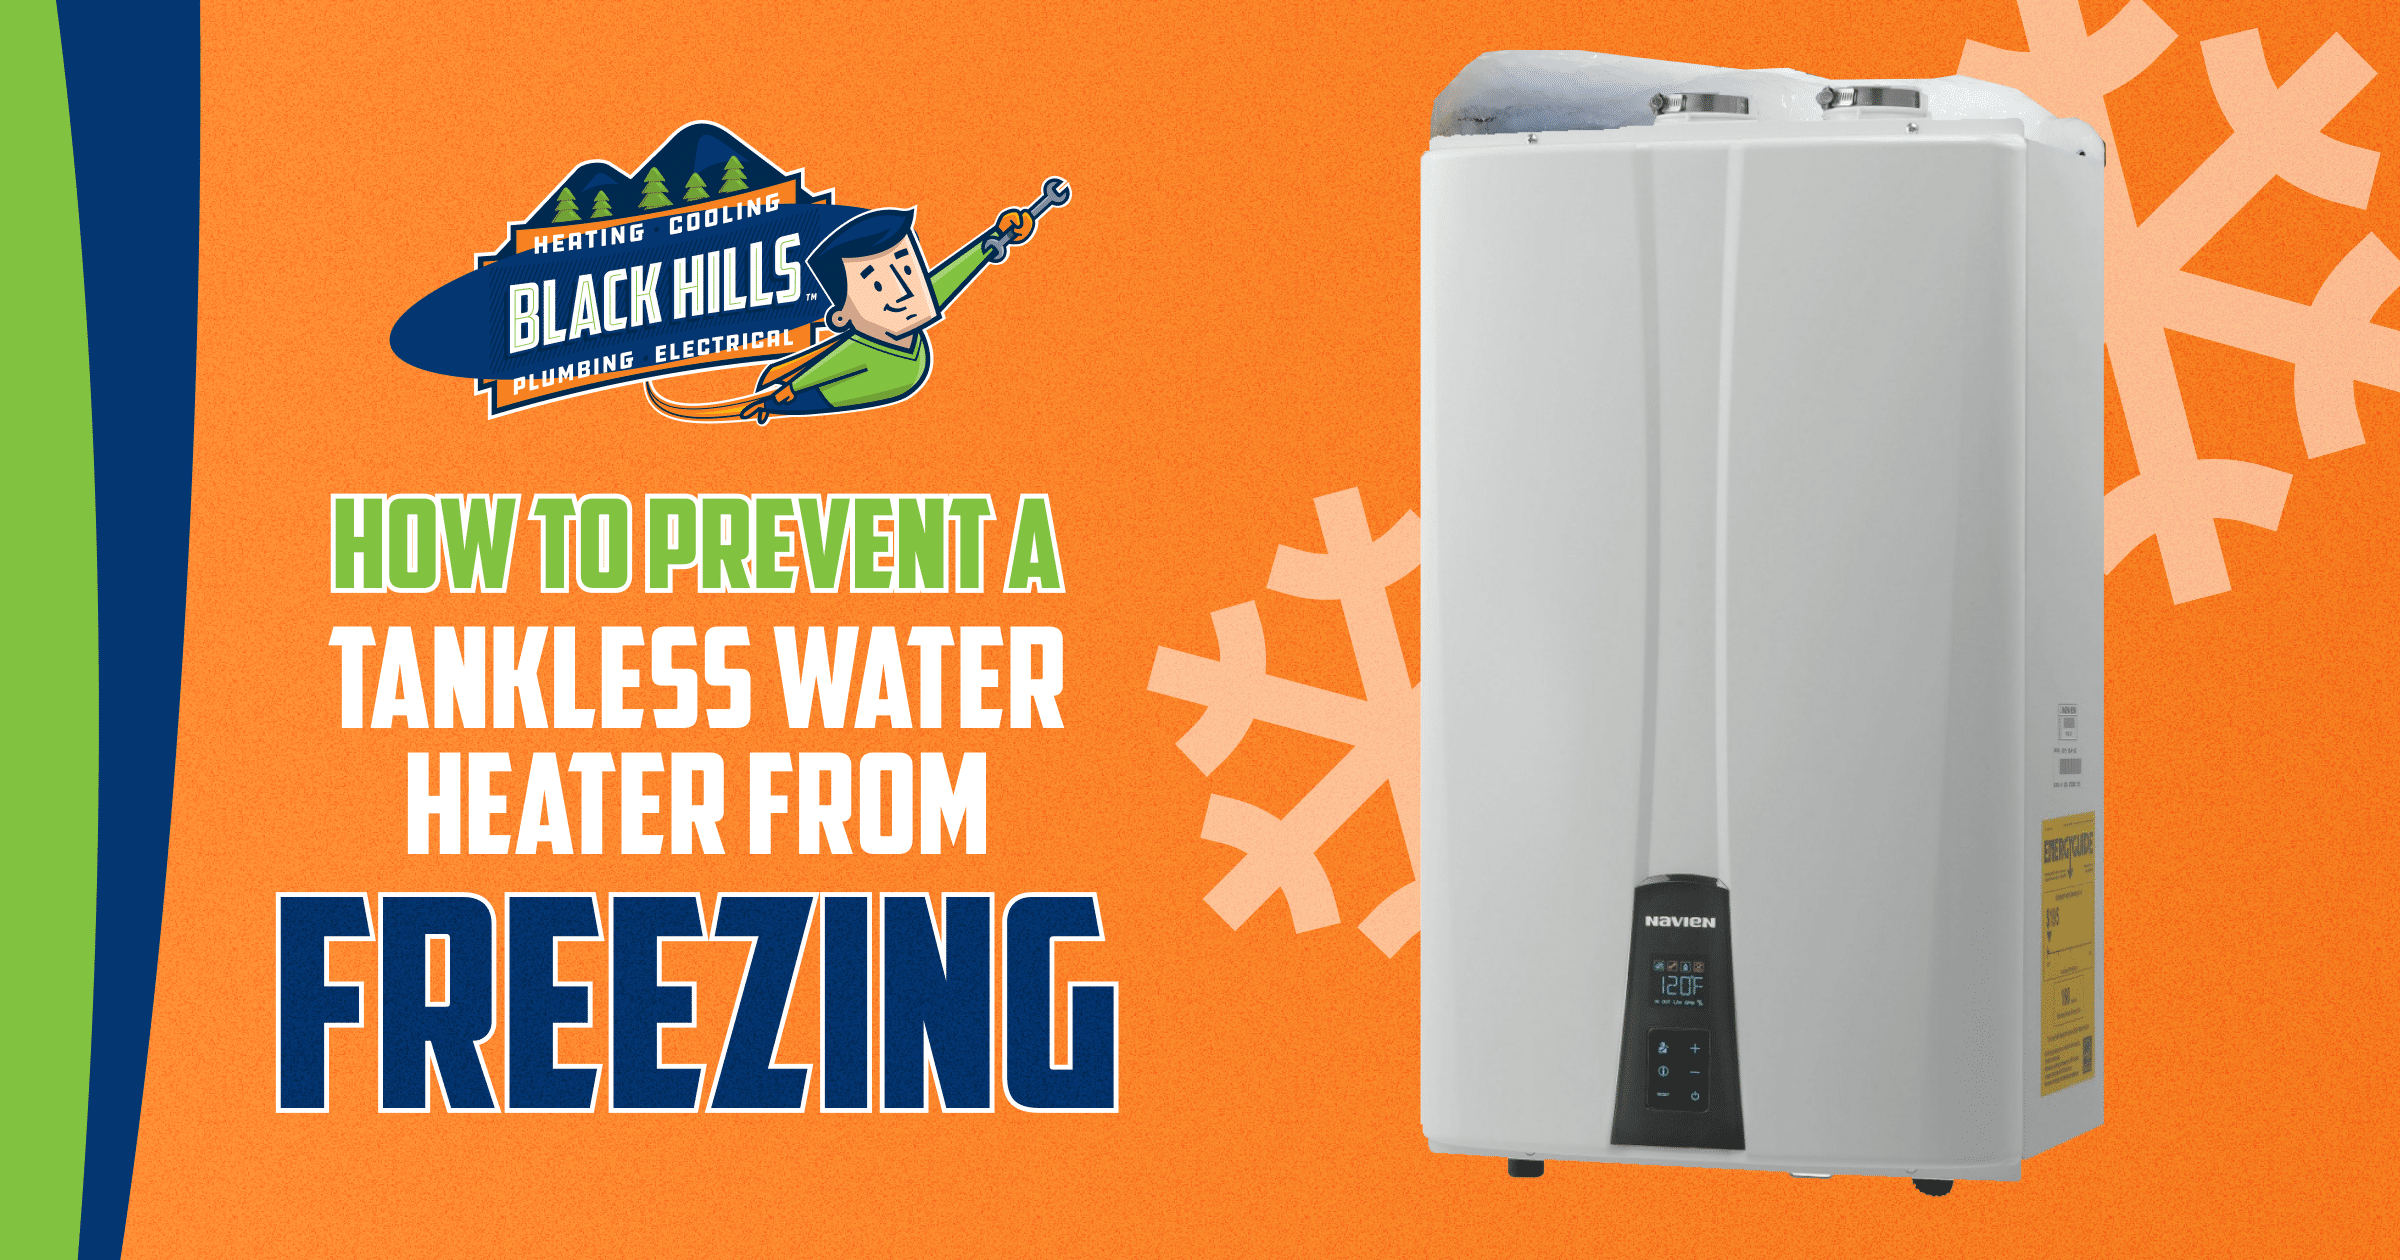 https://www.blackhillsinc.com/wp-content/uploads/2023/03/Black-Hills-How-to-Prevent-a-Tankless-Water-Heater-from-Freezing1200.png